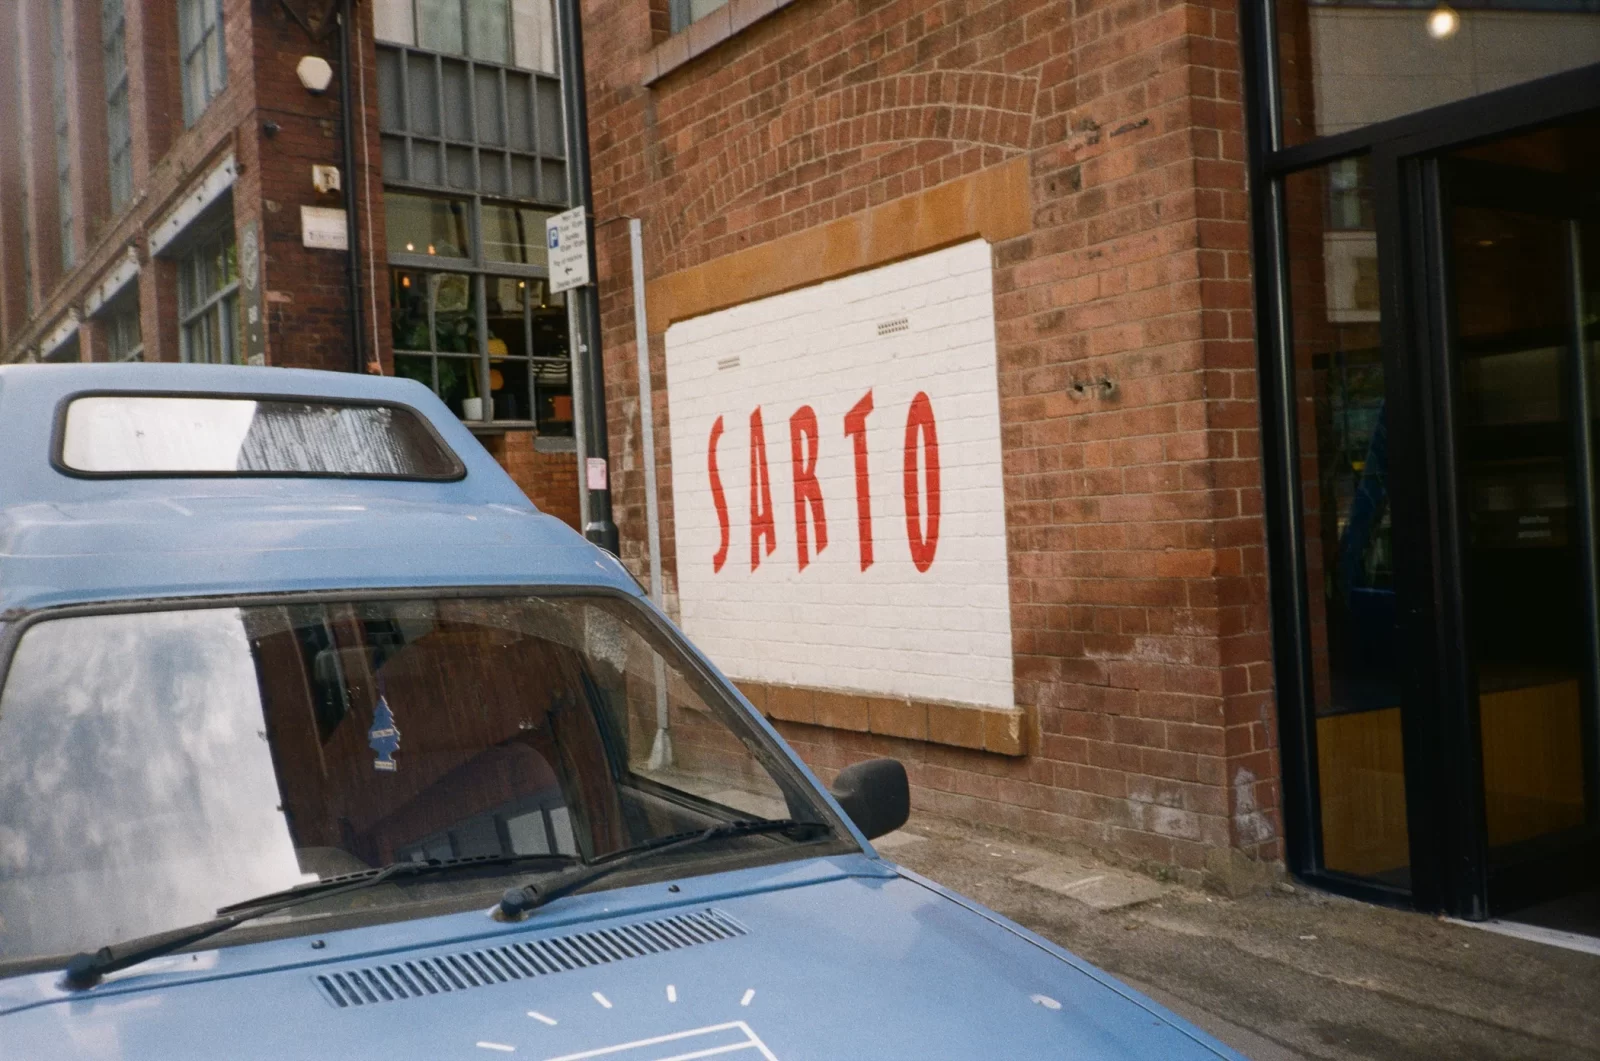 brick will with 'sarto' painted in red.